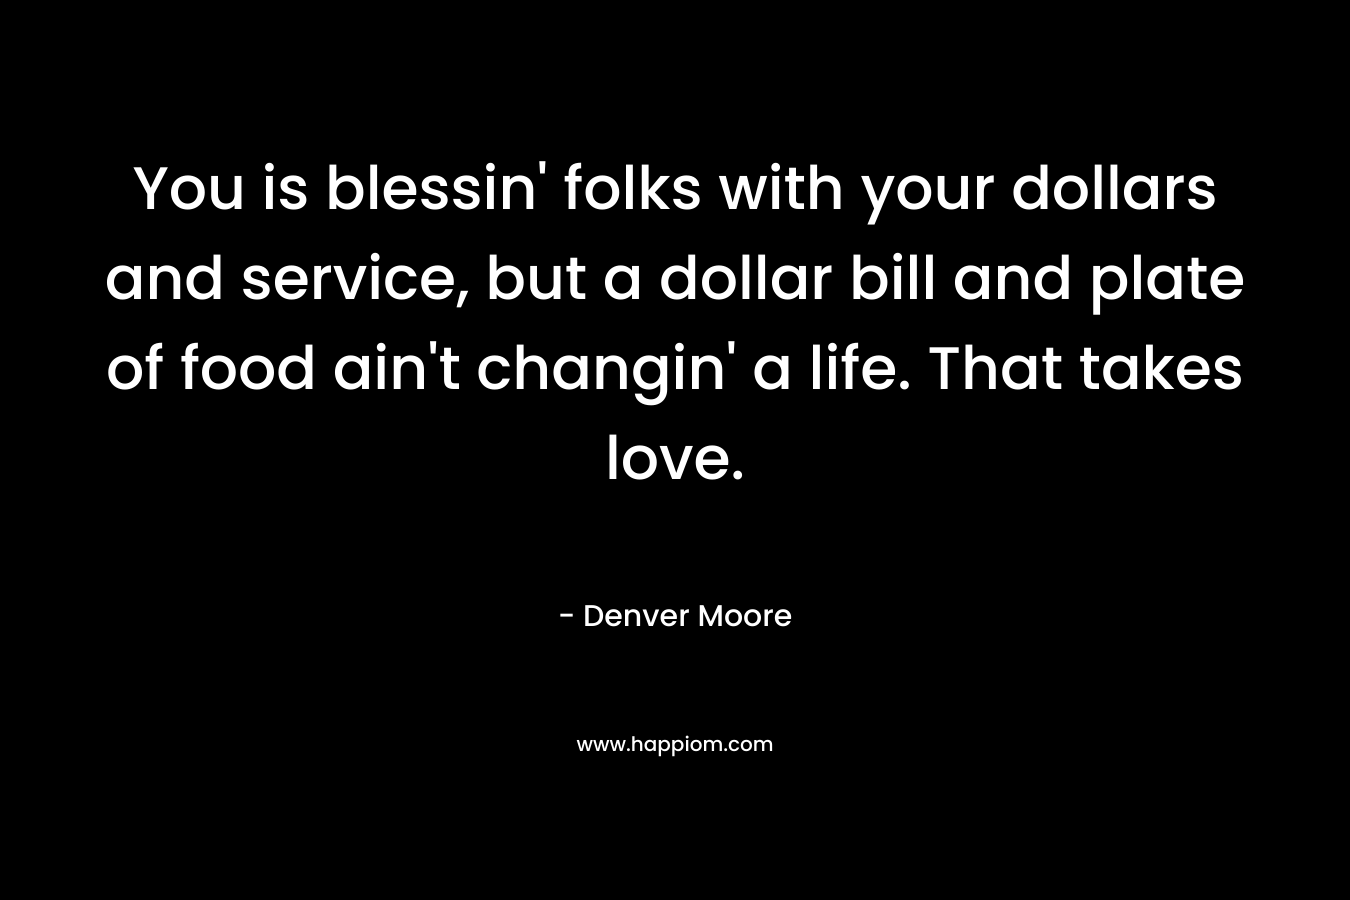 You is blessin’ folks with your dollars and service, but a dollar bill and plate of food ain’t changin’ a life. That takes love. – Denver Moore